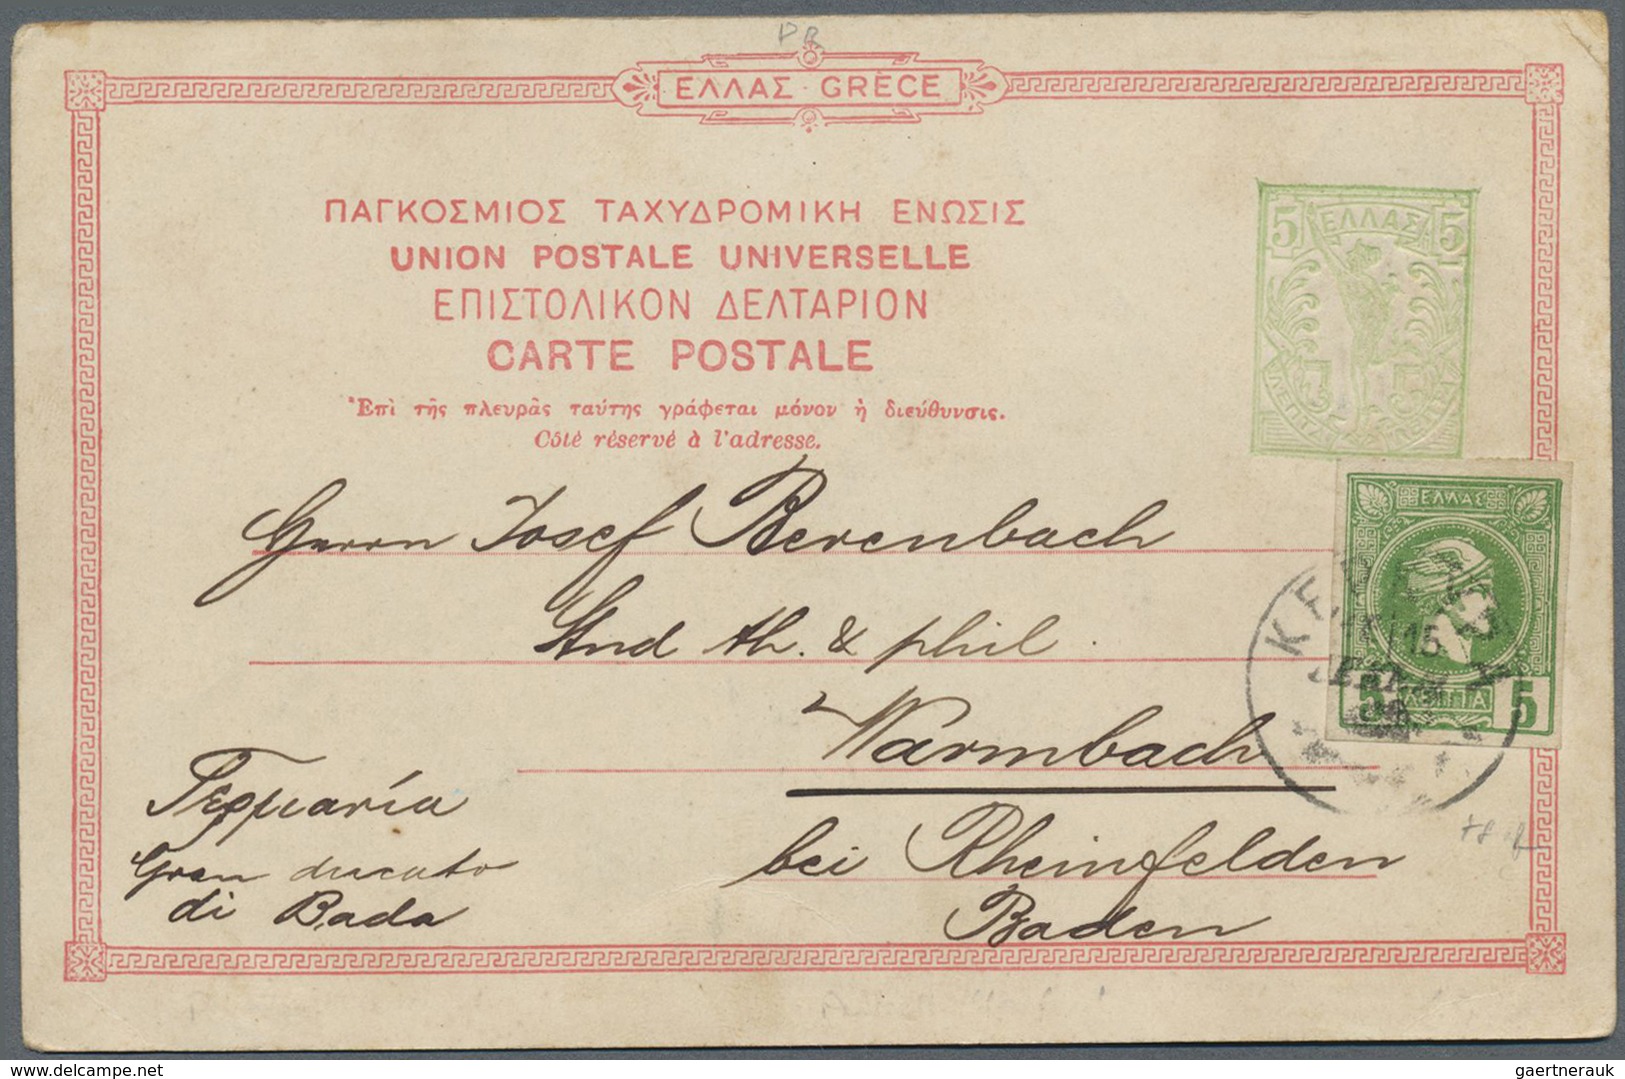 GA Griechenland - Ganzsachen: 1900/05, (ca.), stationery cards with pictorial imprints on reverse (23),